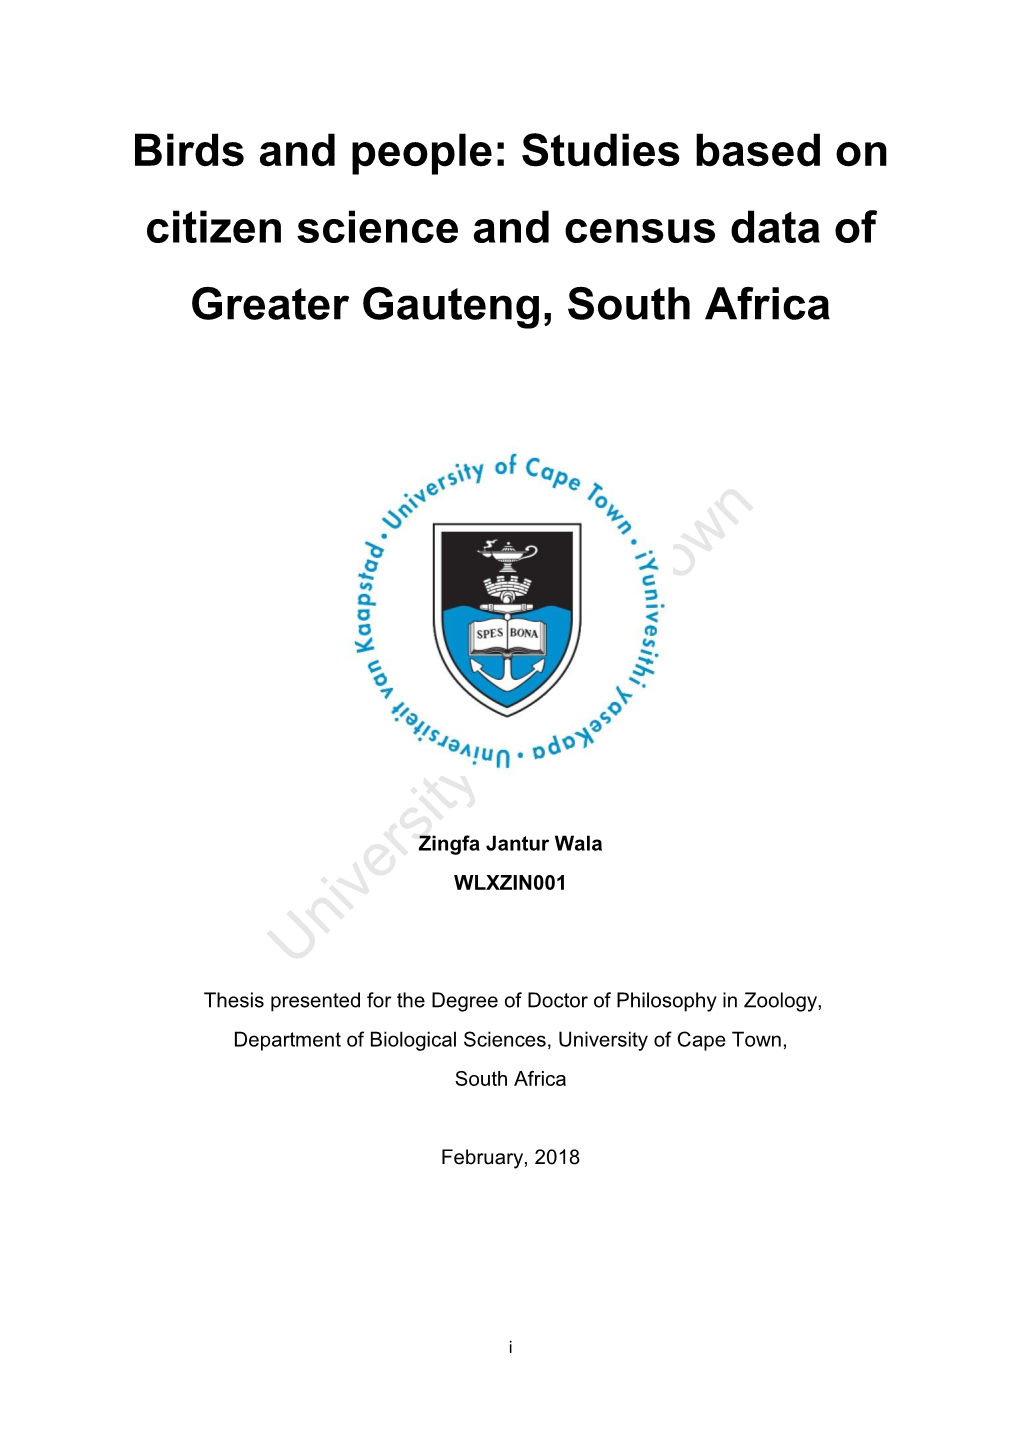 Studies Based on Citizen Science and Census Data of Greater Gauteng, South Africa